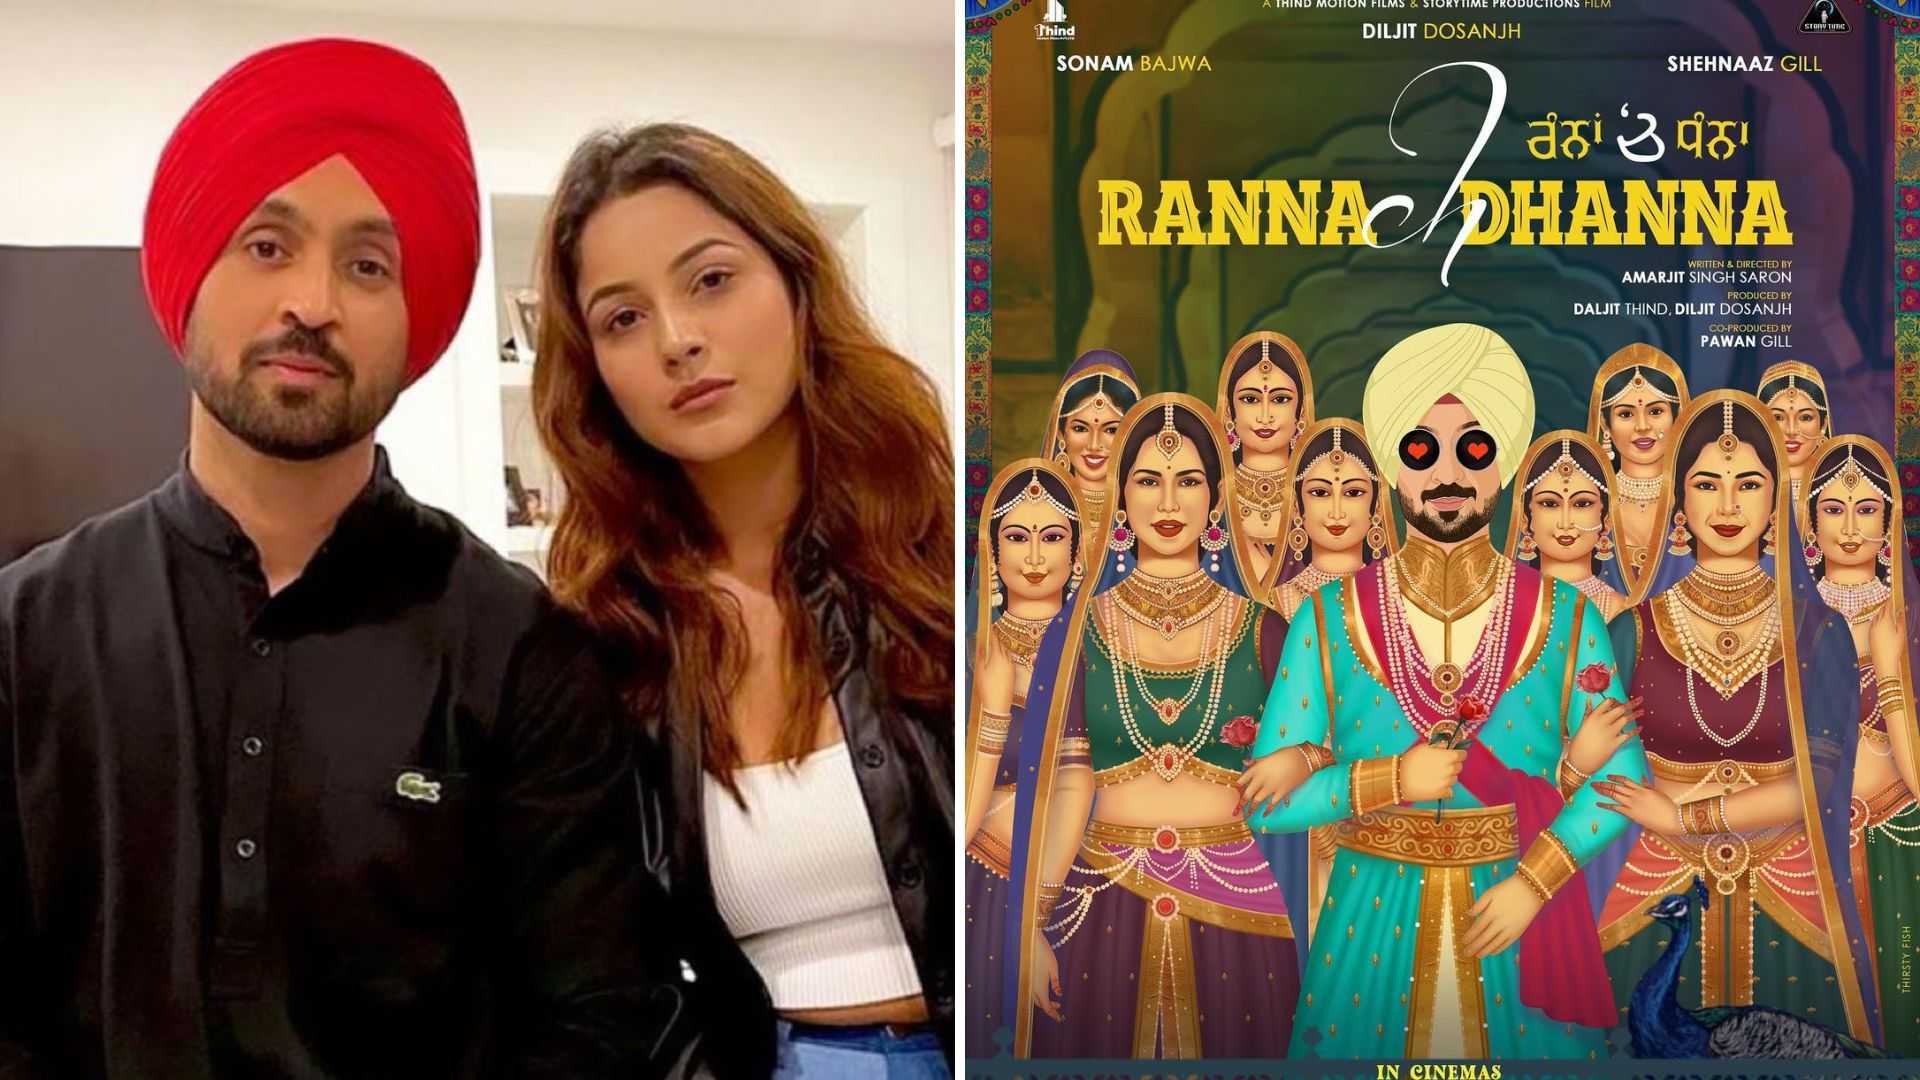 Shehnaaz Gill announces her second film with Diljit Dosanjh titled Ranna Ch Dhanna, fans manifest another hit